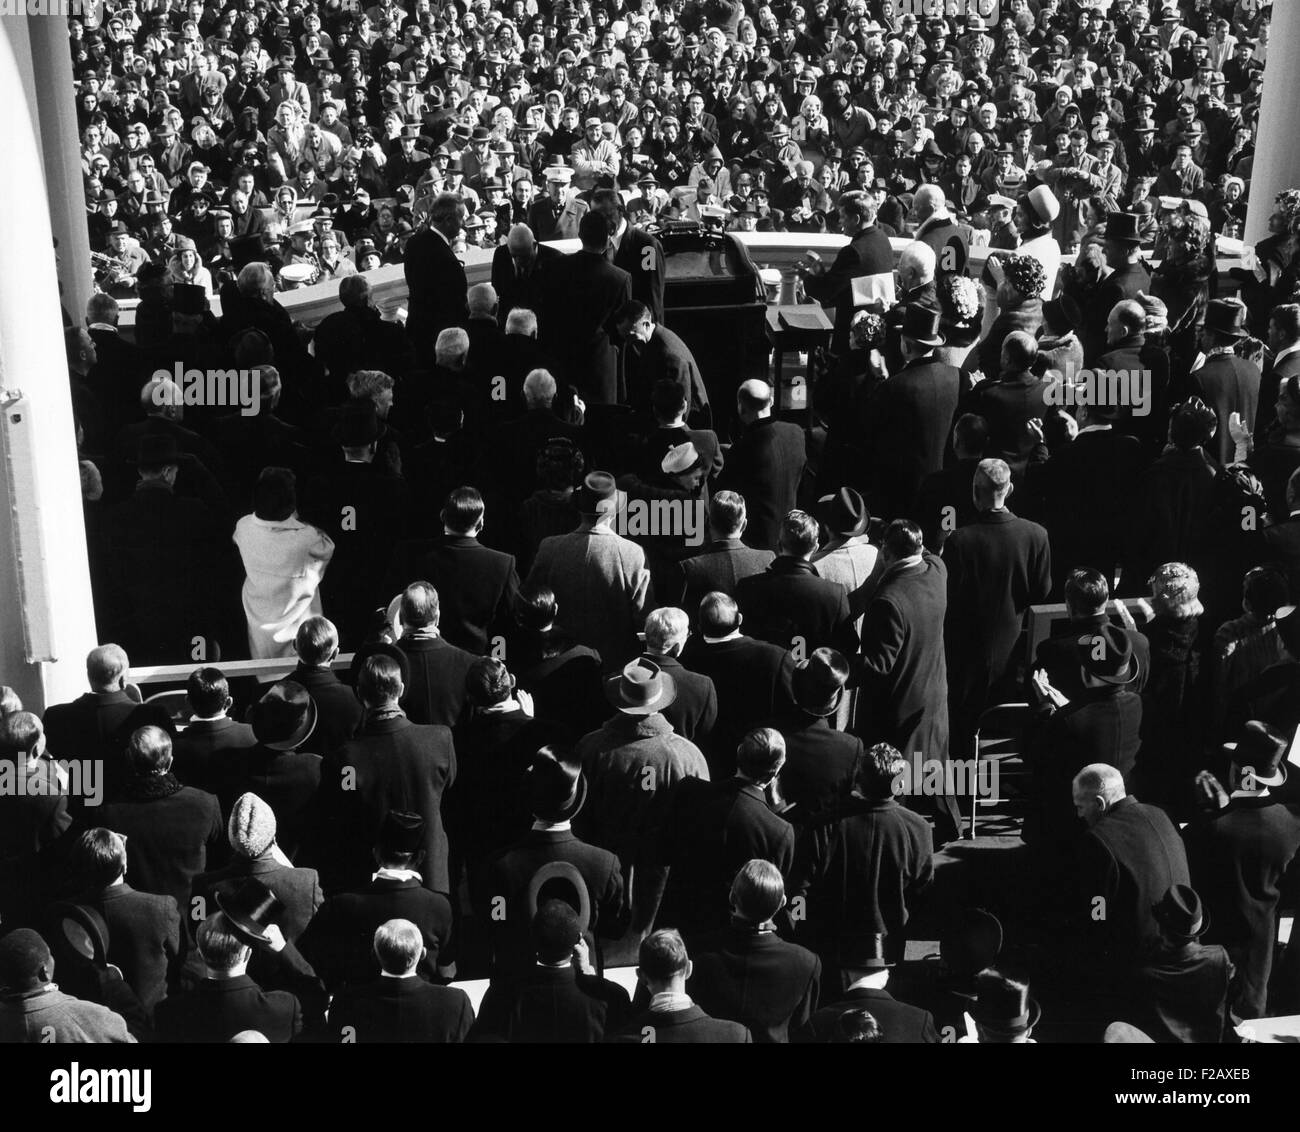 Inauguration of John Kennedy at East Portico, U.S. Capitol Building. View from the back of the audience, showing the faces of the crowd below. Jan. 20, 1961. (BSLOC 2015 2 221) Stock Photo